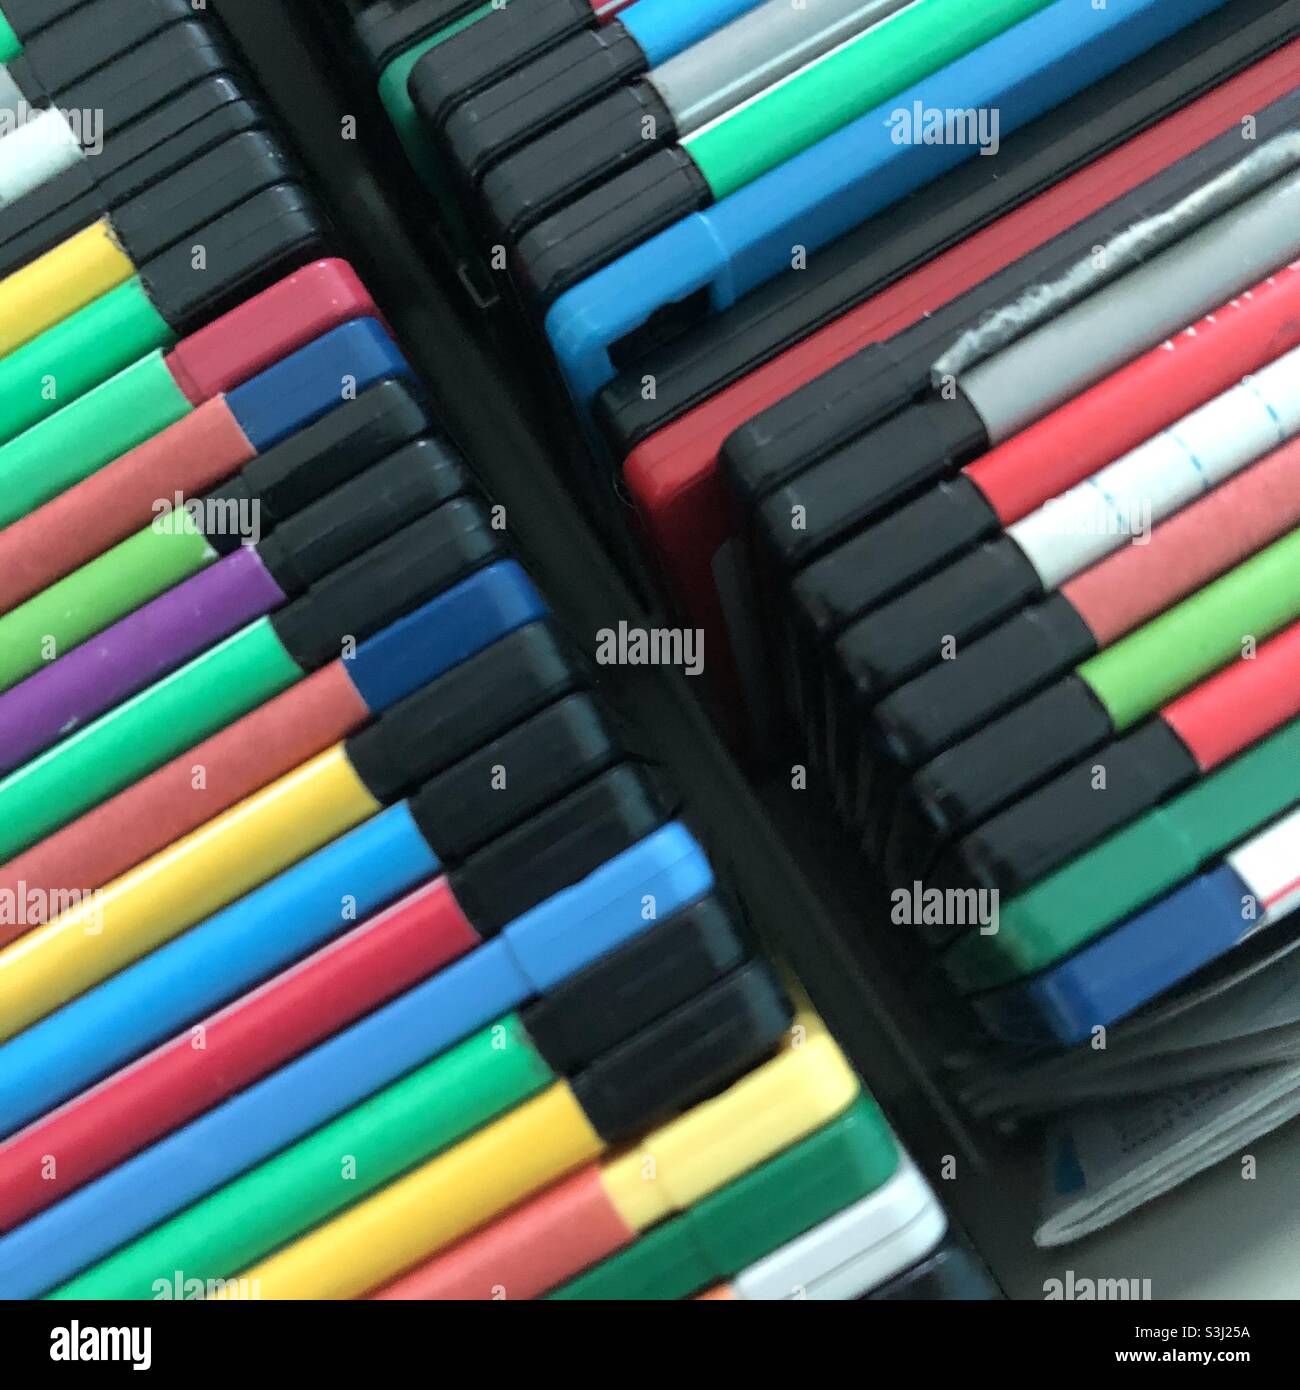 Vintage floppy disks for old computer with colorful labels Stock Photo